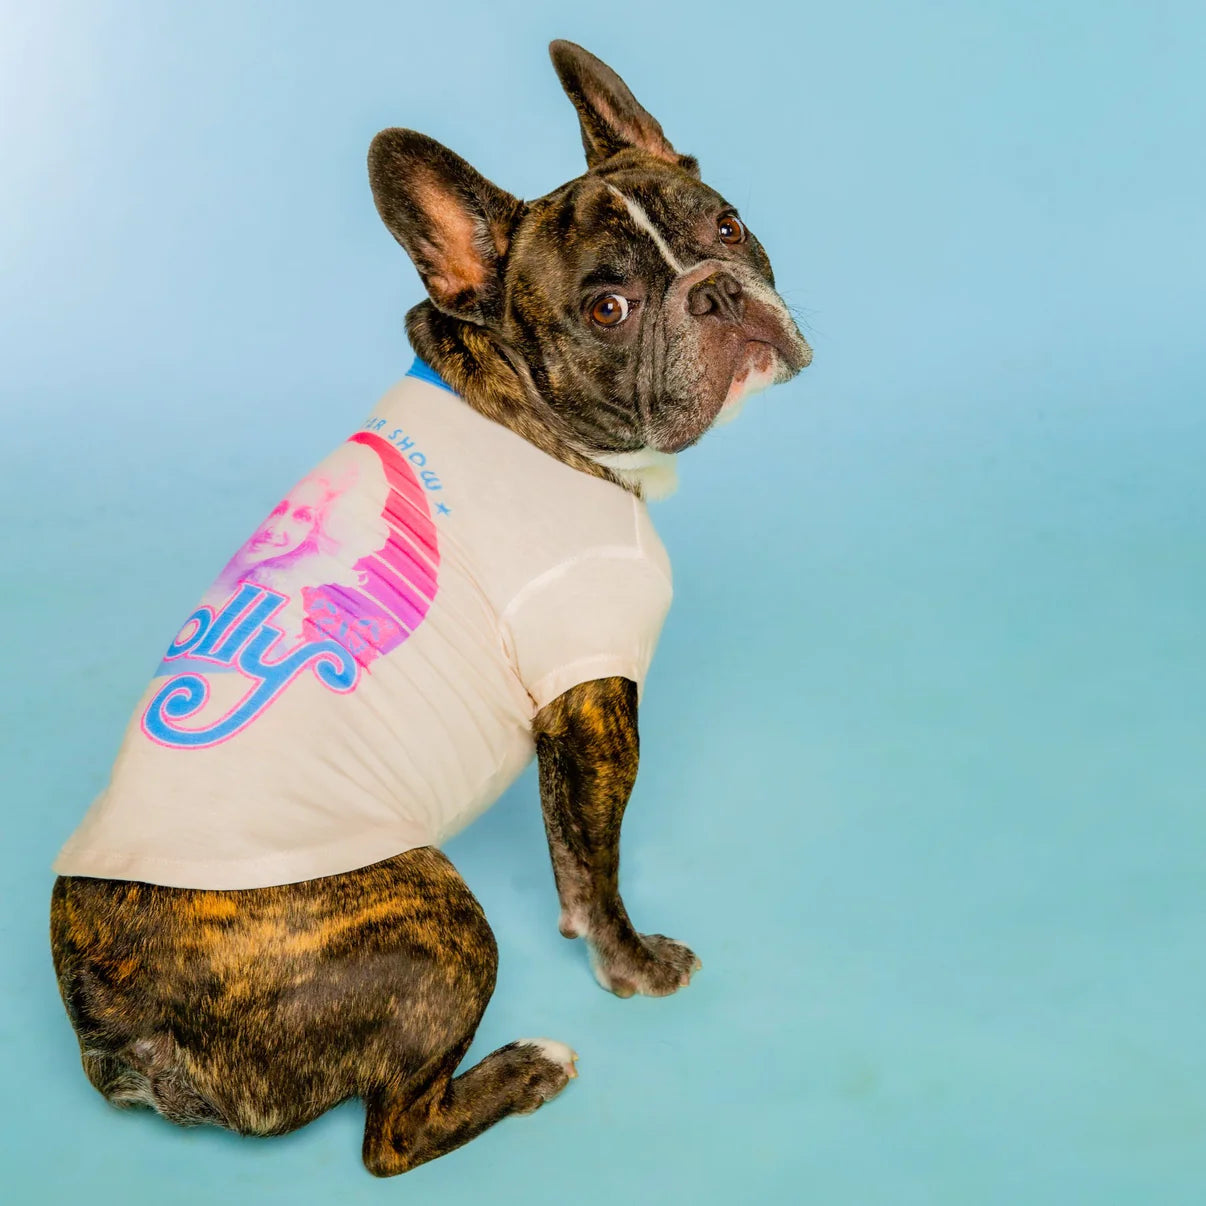 Doggy Parton - White All Star Show Vintage Style Shirt for Pets